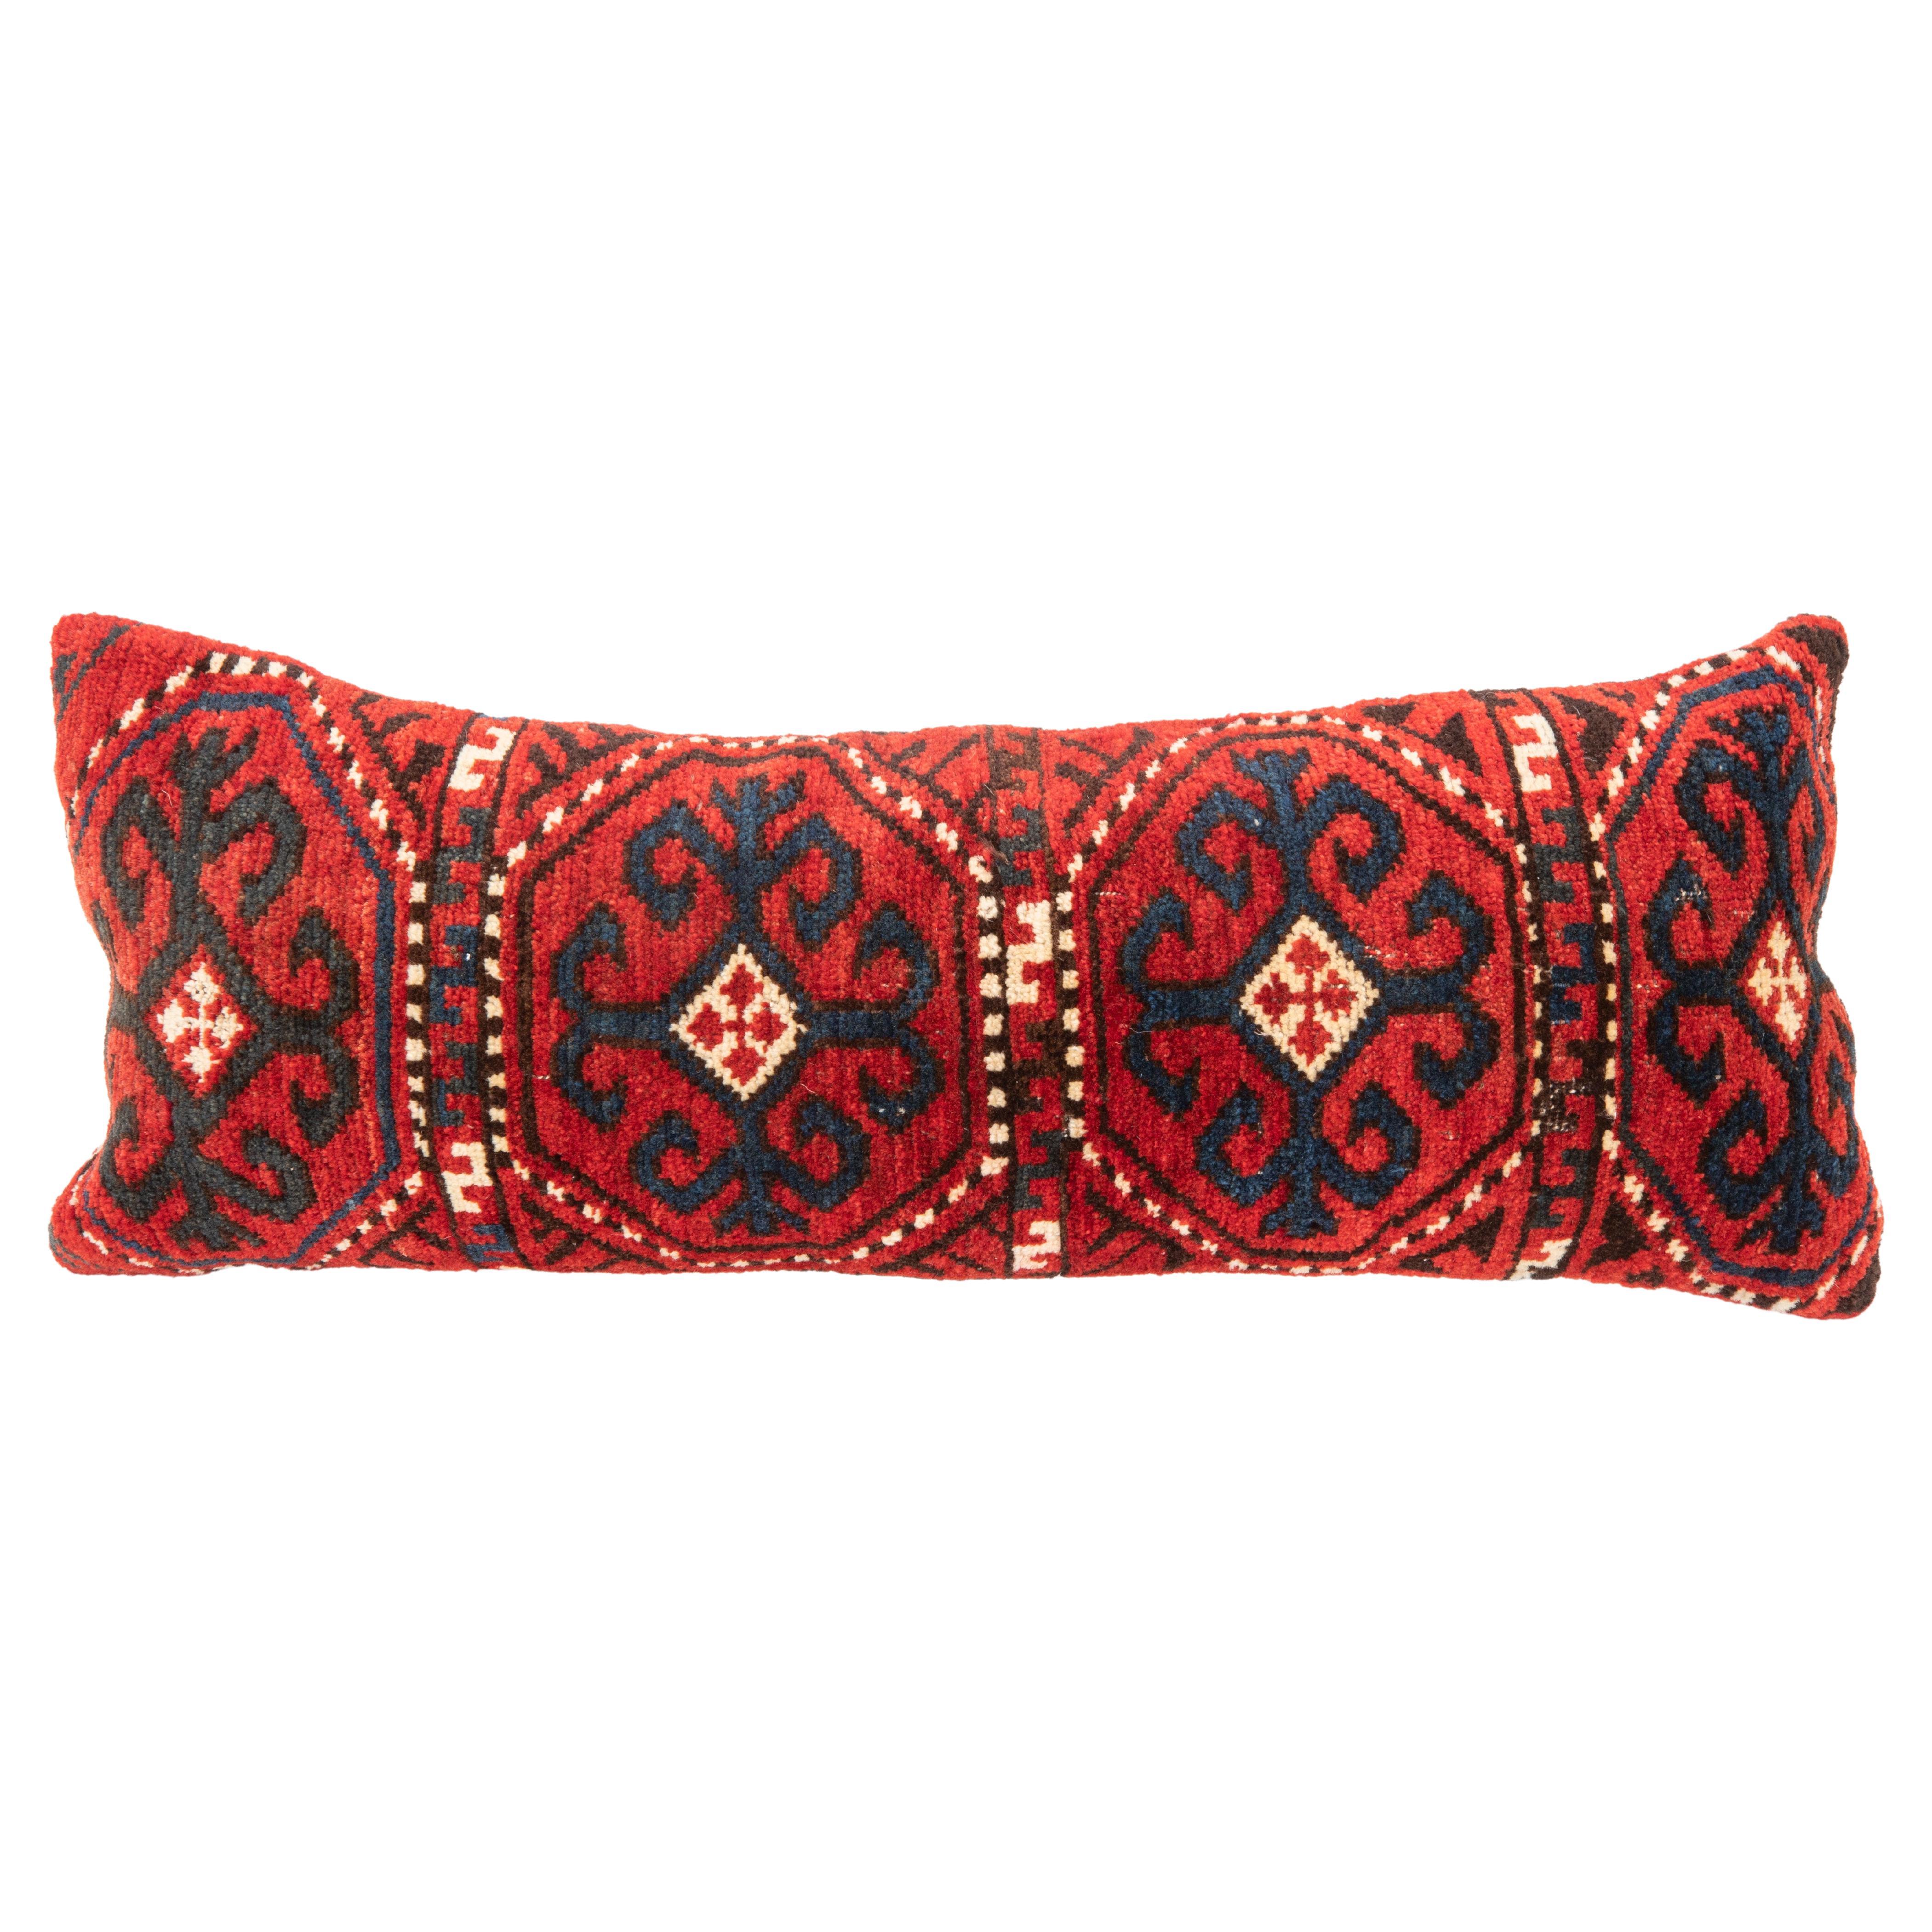 Pillow Cover Fashioned from  an Antique Napramach ( Storage bag )